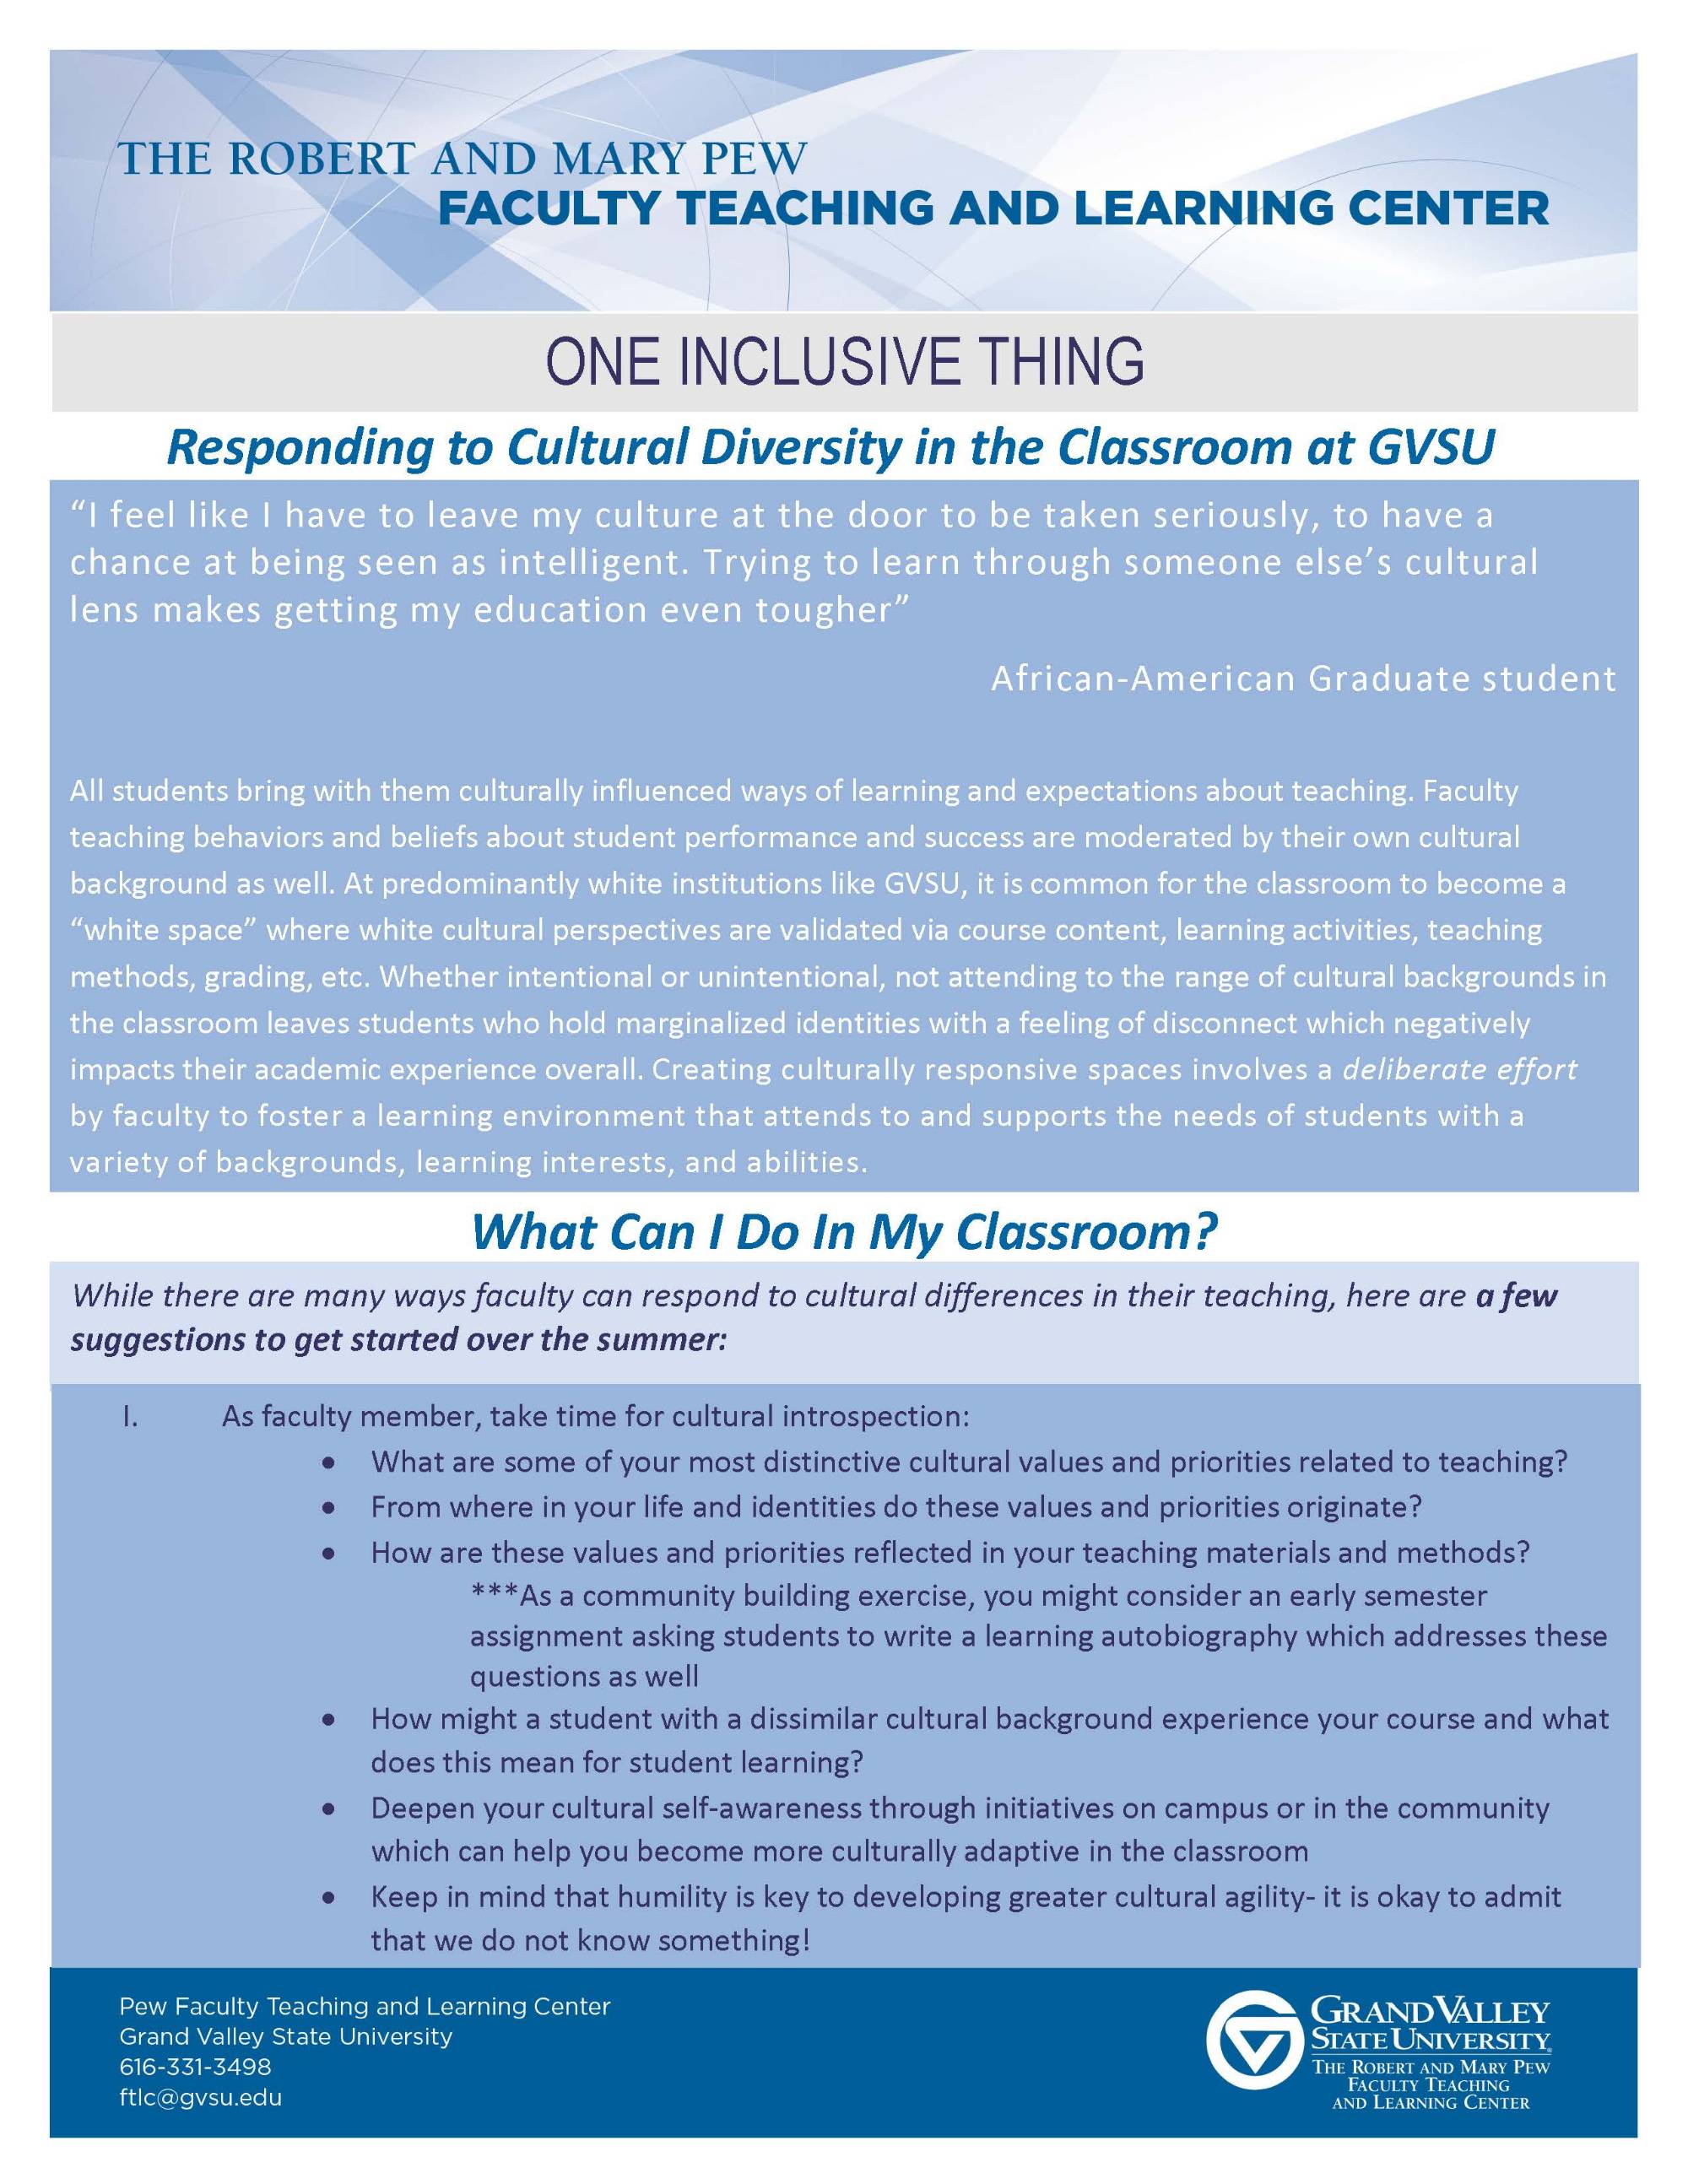 Latest Addition of Print Communication "One Inclusive Thing"